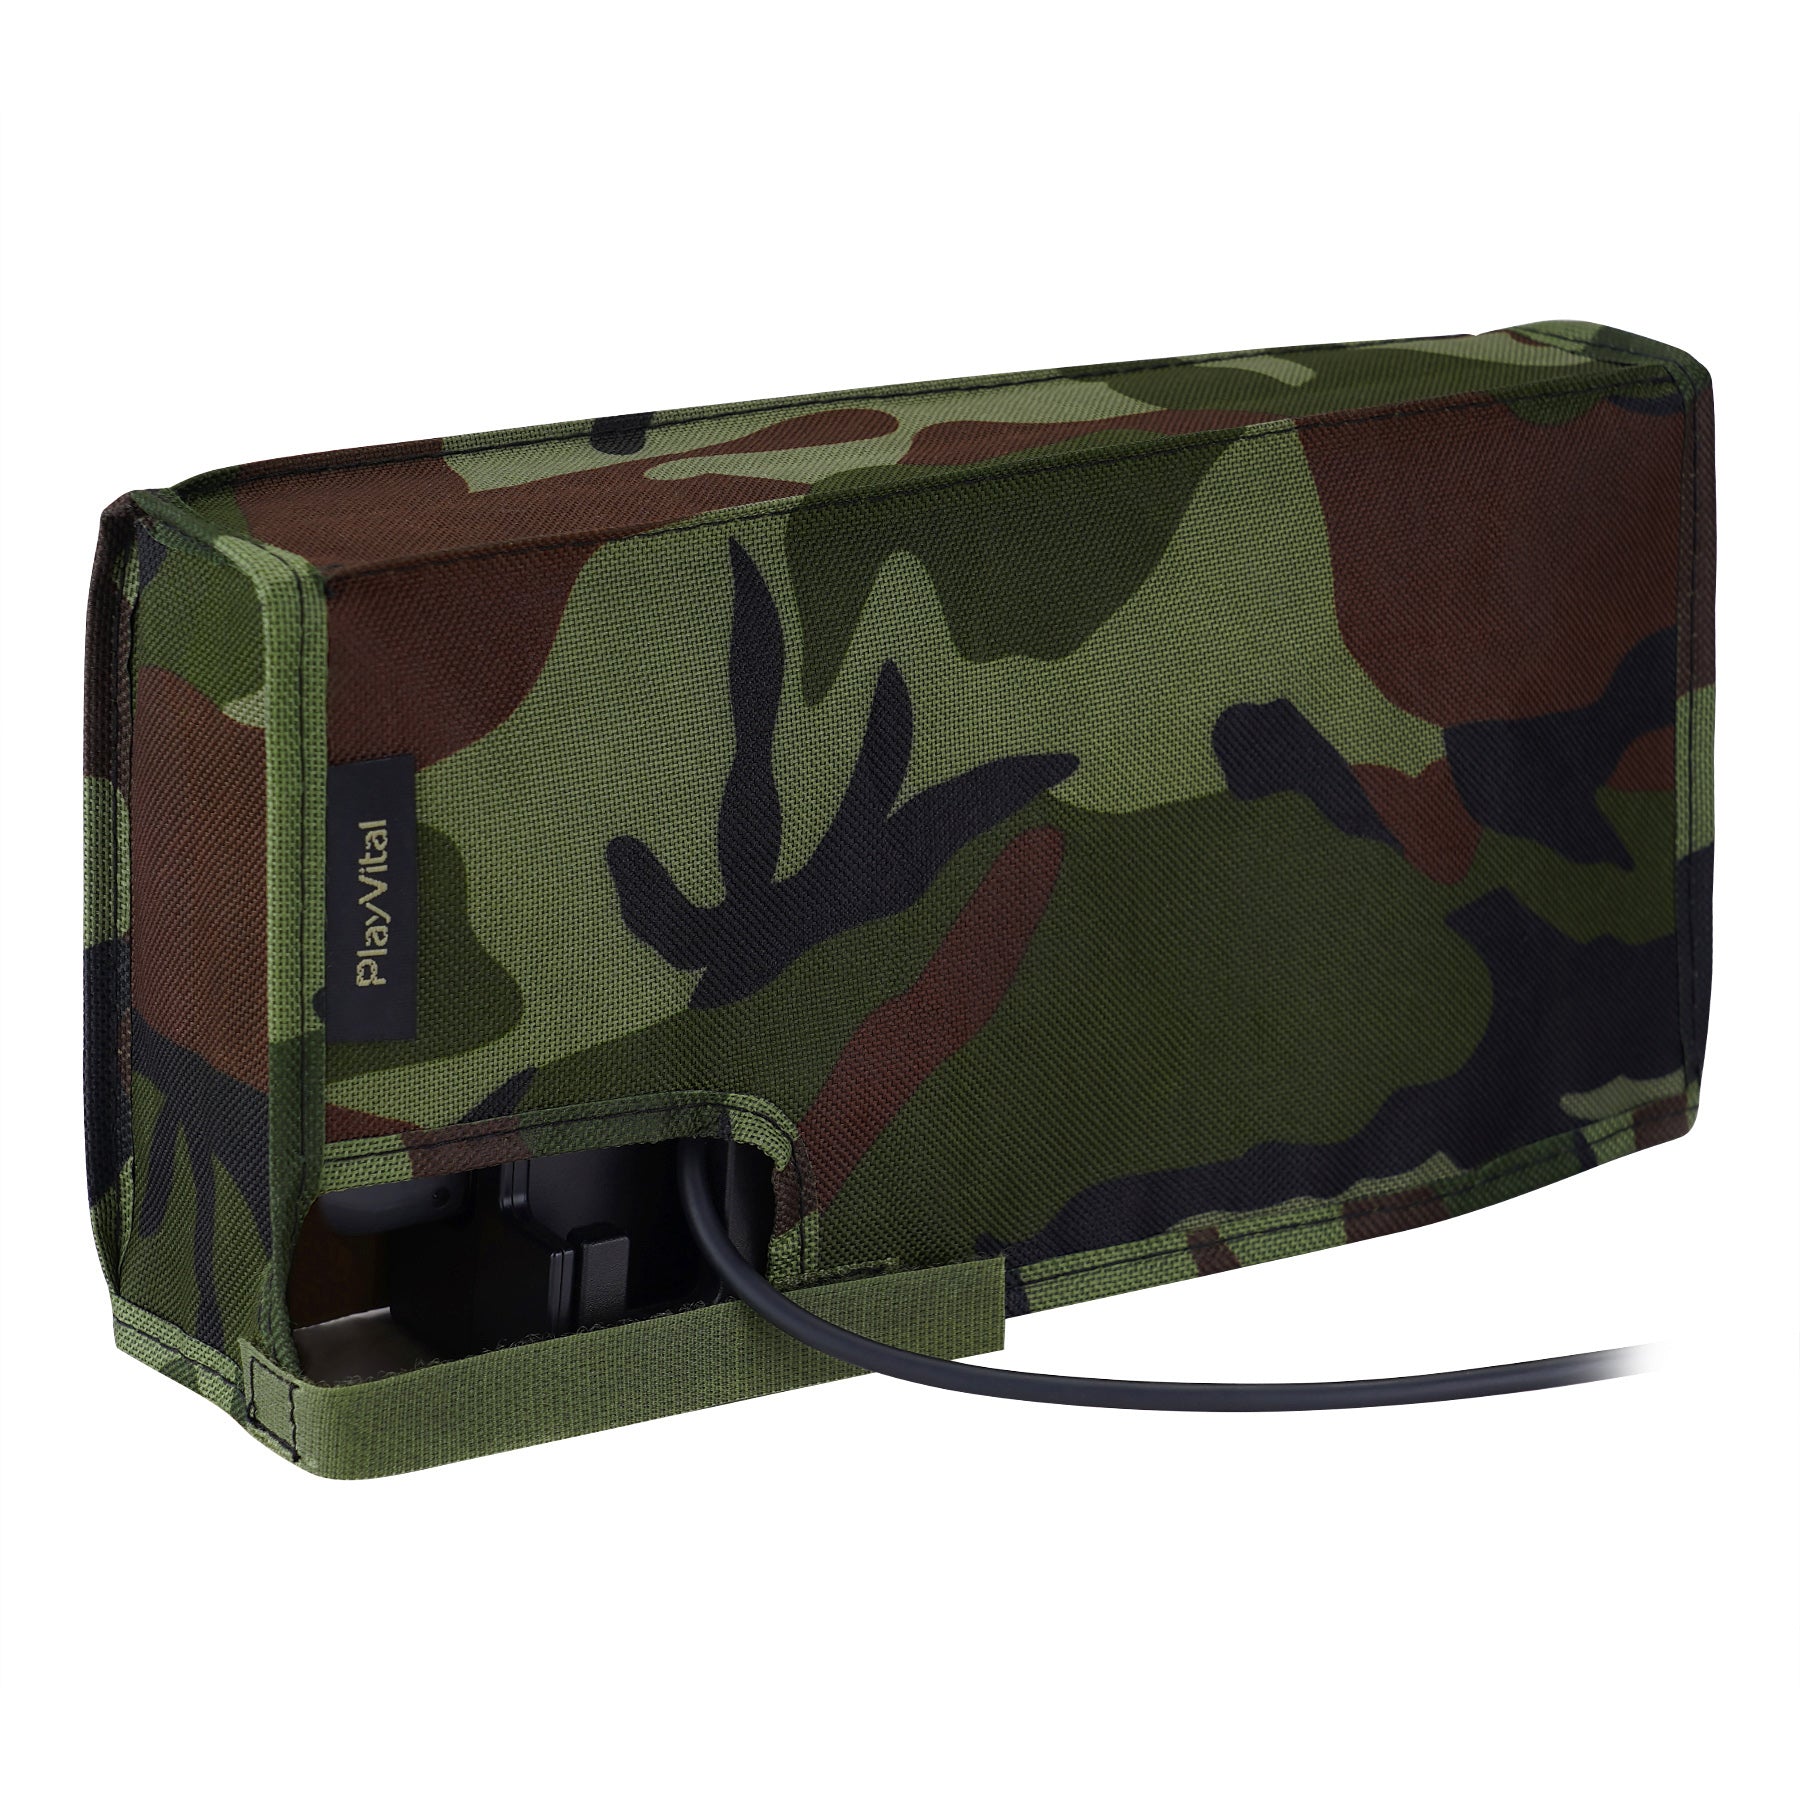 PlayVital Forest Camouflage Nylon Dust Cover, Soft Neat Lining Dust Guard, Anti Scratch Waterproof Cover Sleeve for NS Switch & Switch OLED Charging Dock - NTA8006 PlayVital